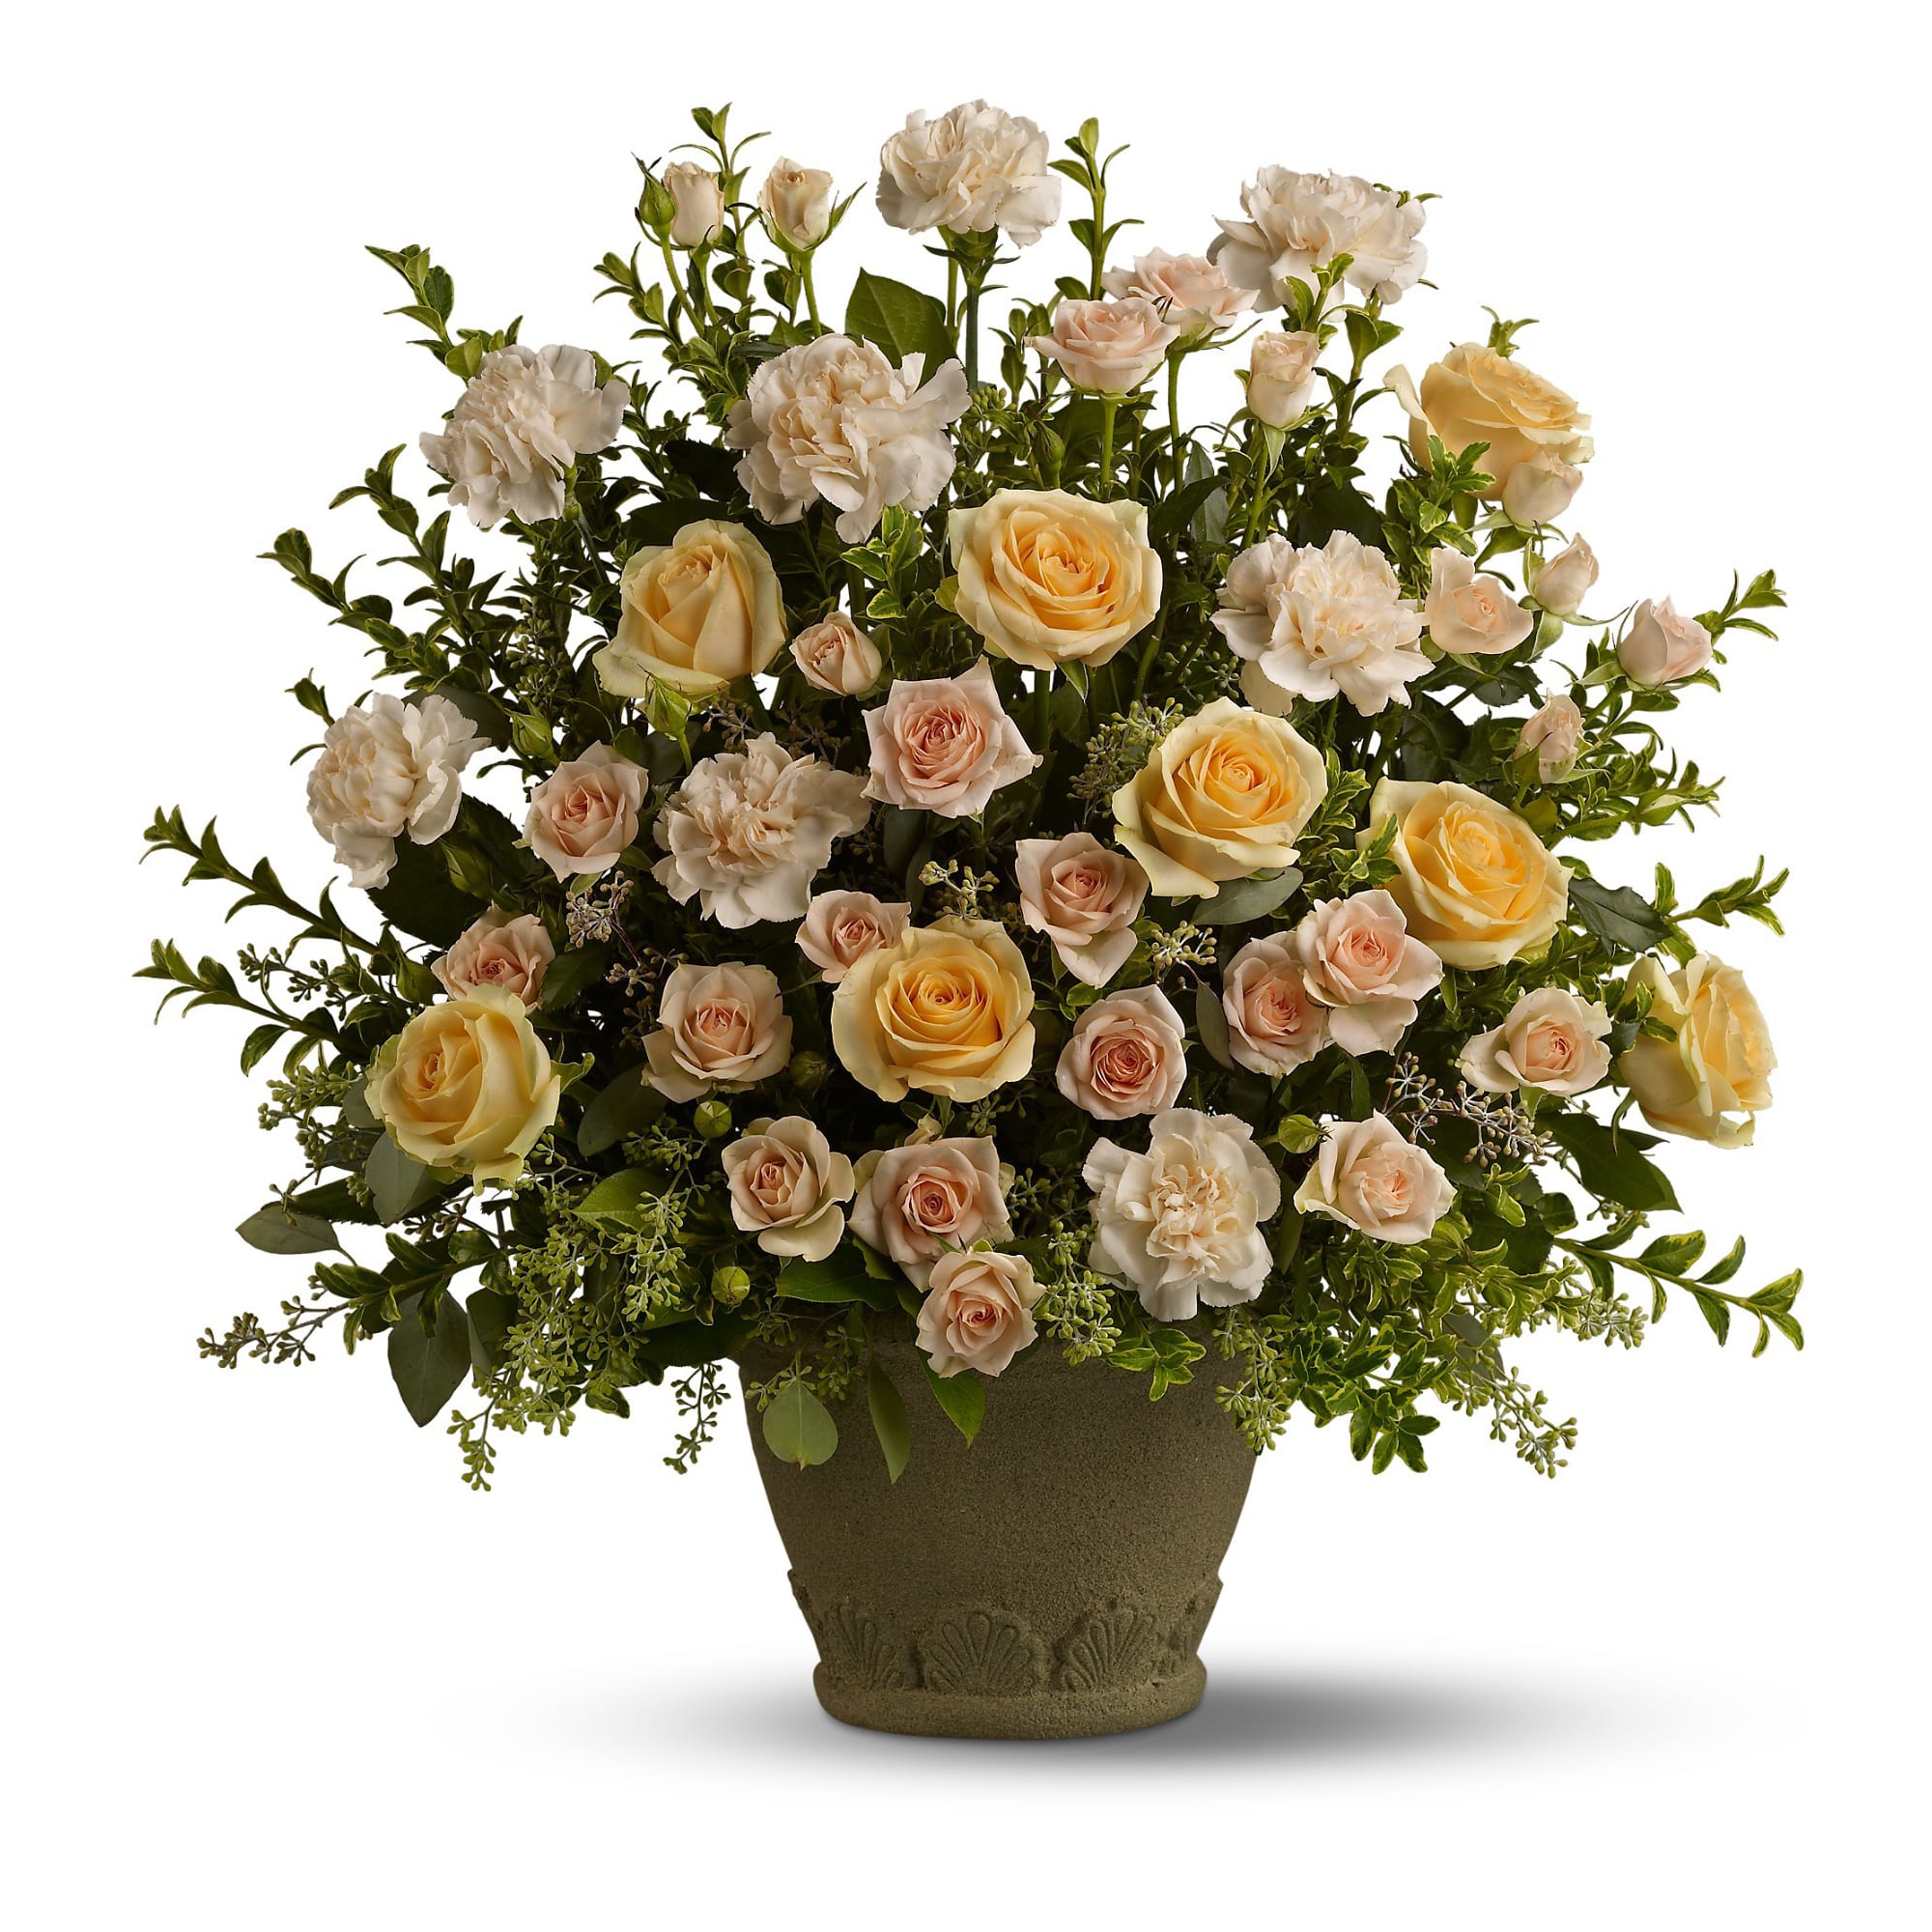 Teleflora's Rose Remembrance - To create a truly stunning tribute, choose a magnificent, fragrant display of peach roses, spray roses and carnations - accented with greenery, and displayed in a classic Grecian Garden urn. A gracious mark of respect for a life well lived. 